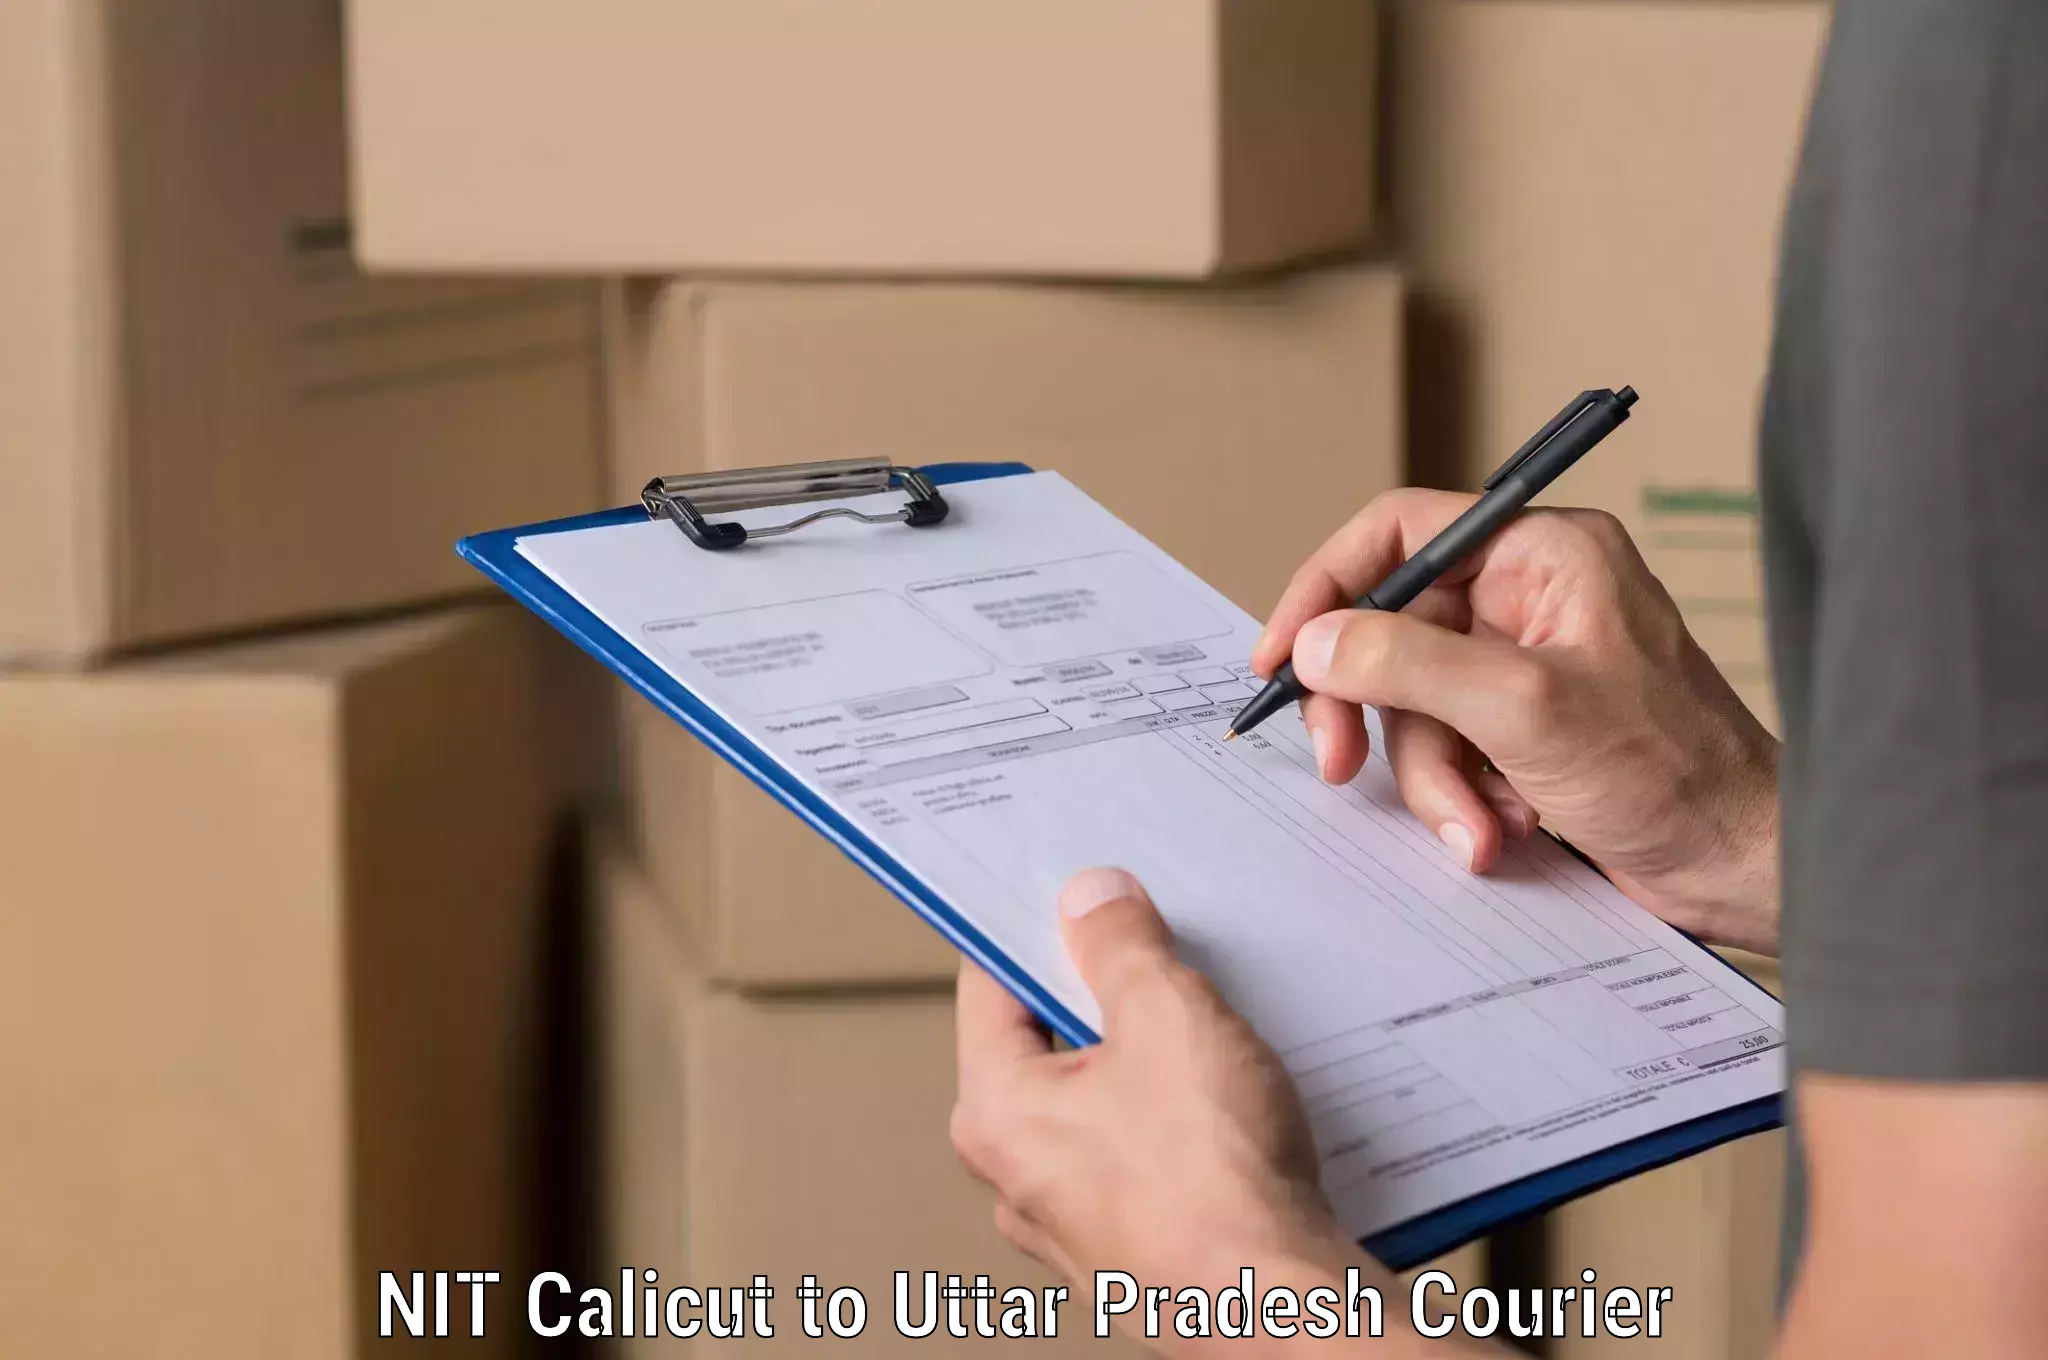 Cash on delivery service NIT Calicut to Lalitpur